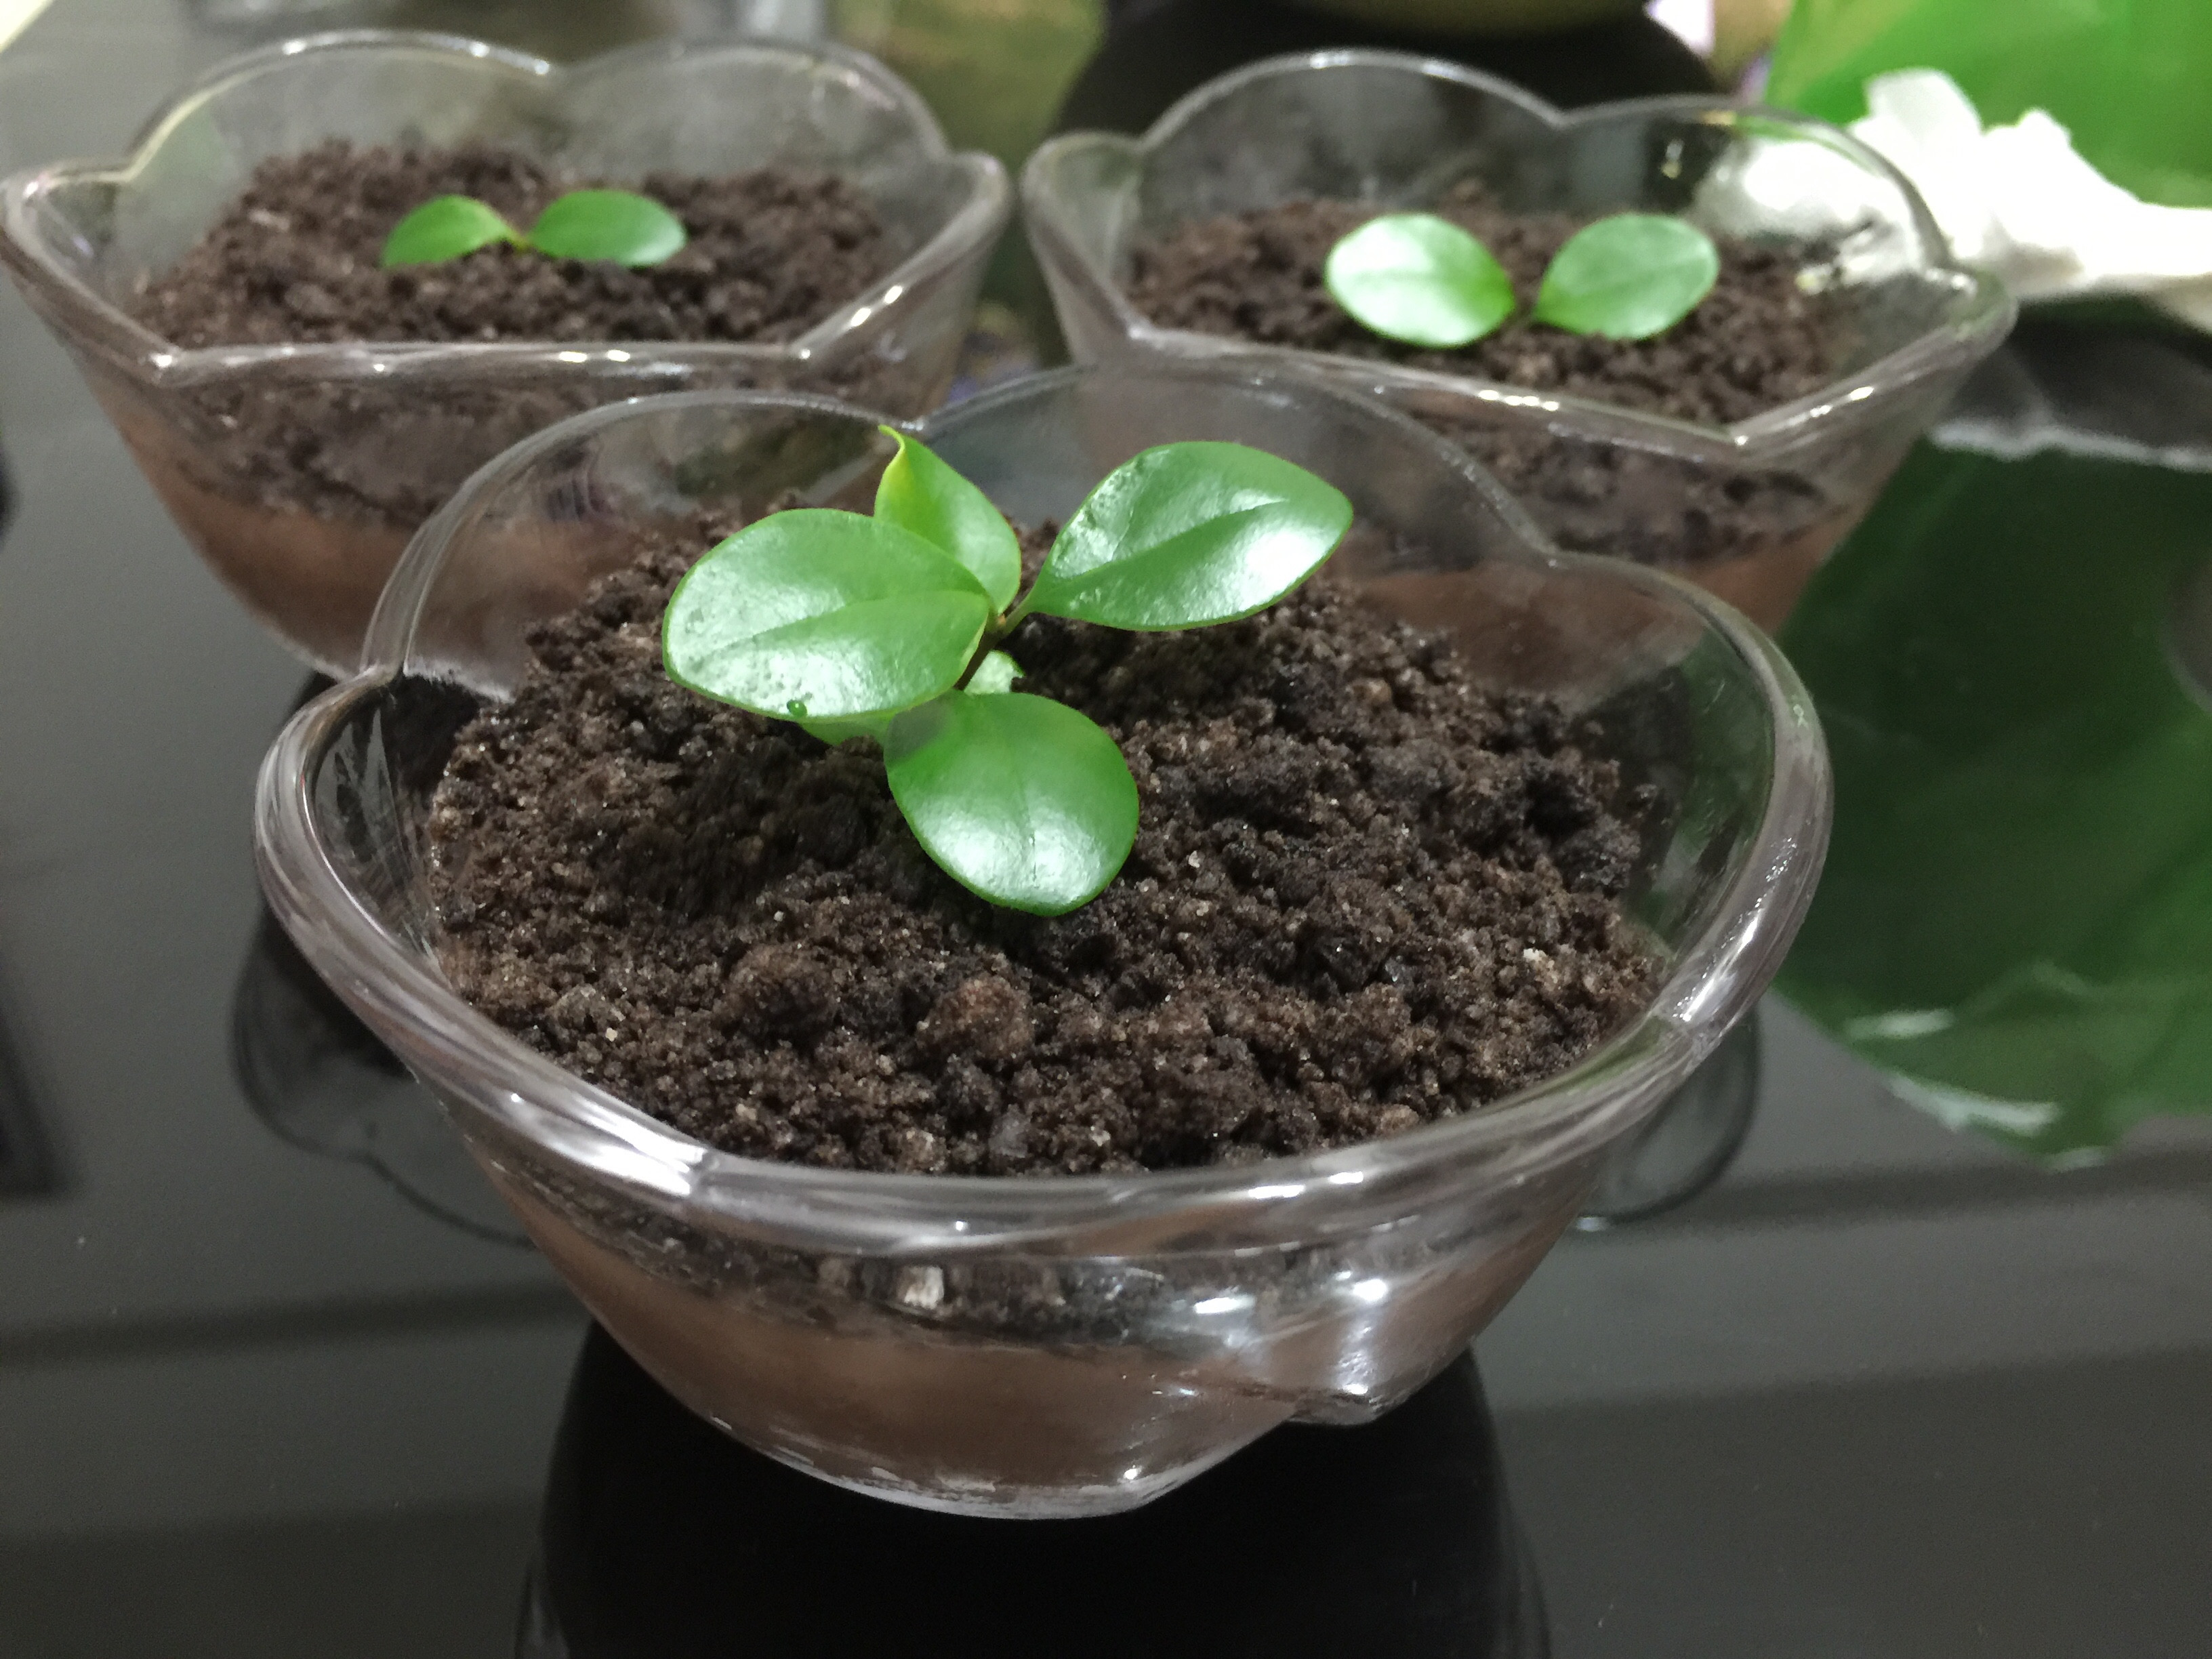 Violet's Kitchen ~♥紫羅蘭的爱心厨房♥~ : 盆栽巧克力布丁 Potted Plant Chocolate Pudding